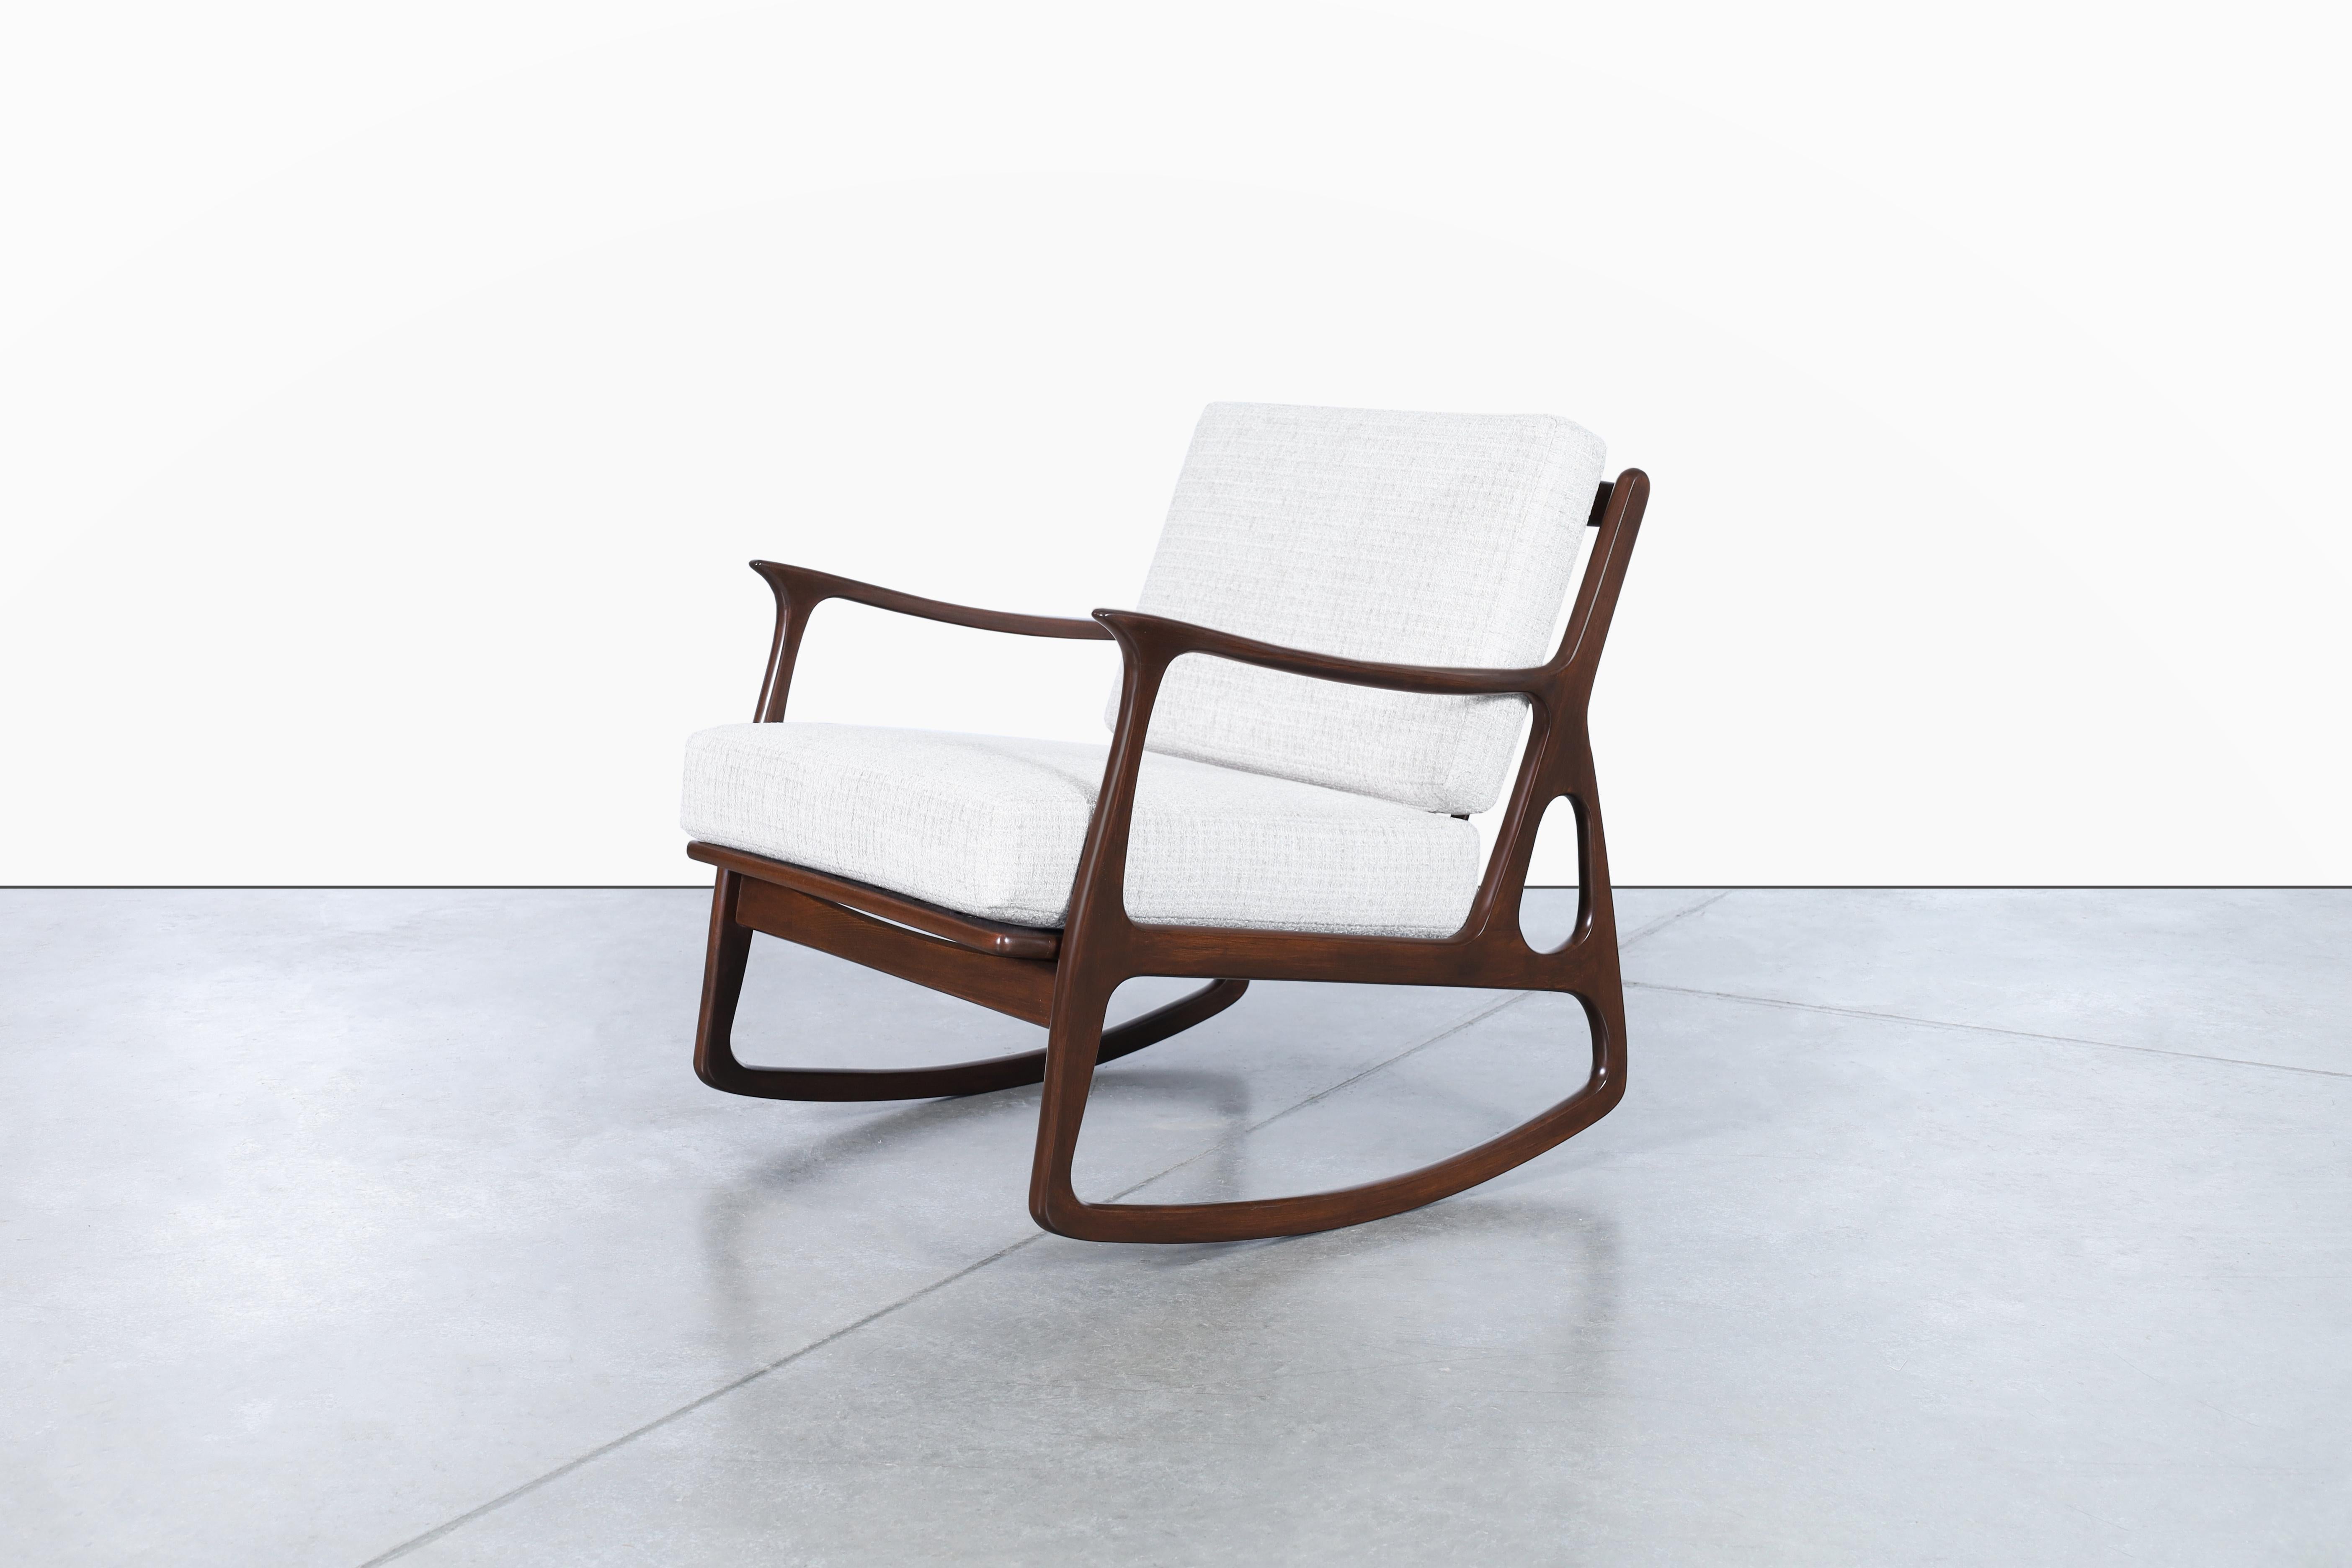 This vintage Italian sculptural rocking chair is a true work of art. Handcrafted with a walnut frame, it boasts a stunning sculptural design that is both elegant and unique. The chair has been beautifully refinished and reupholstered with a thick